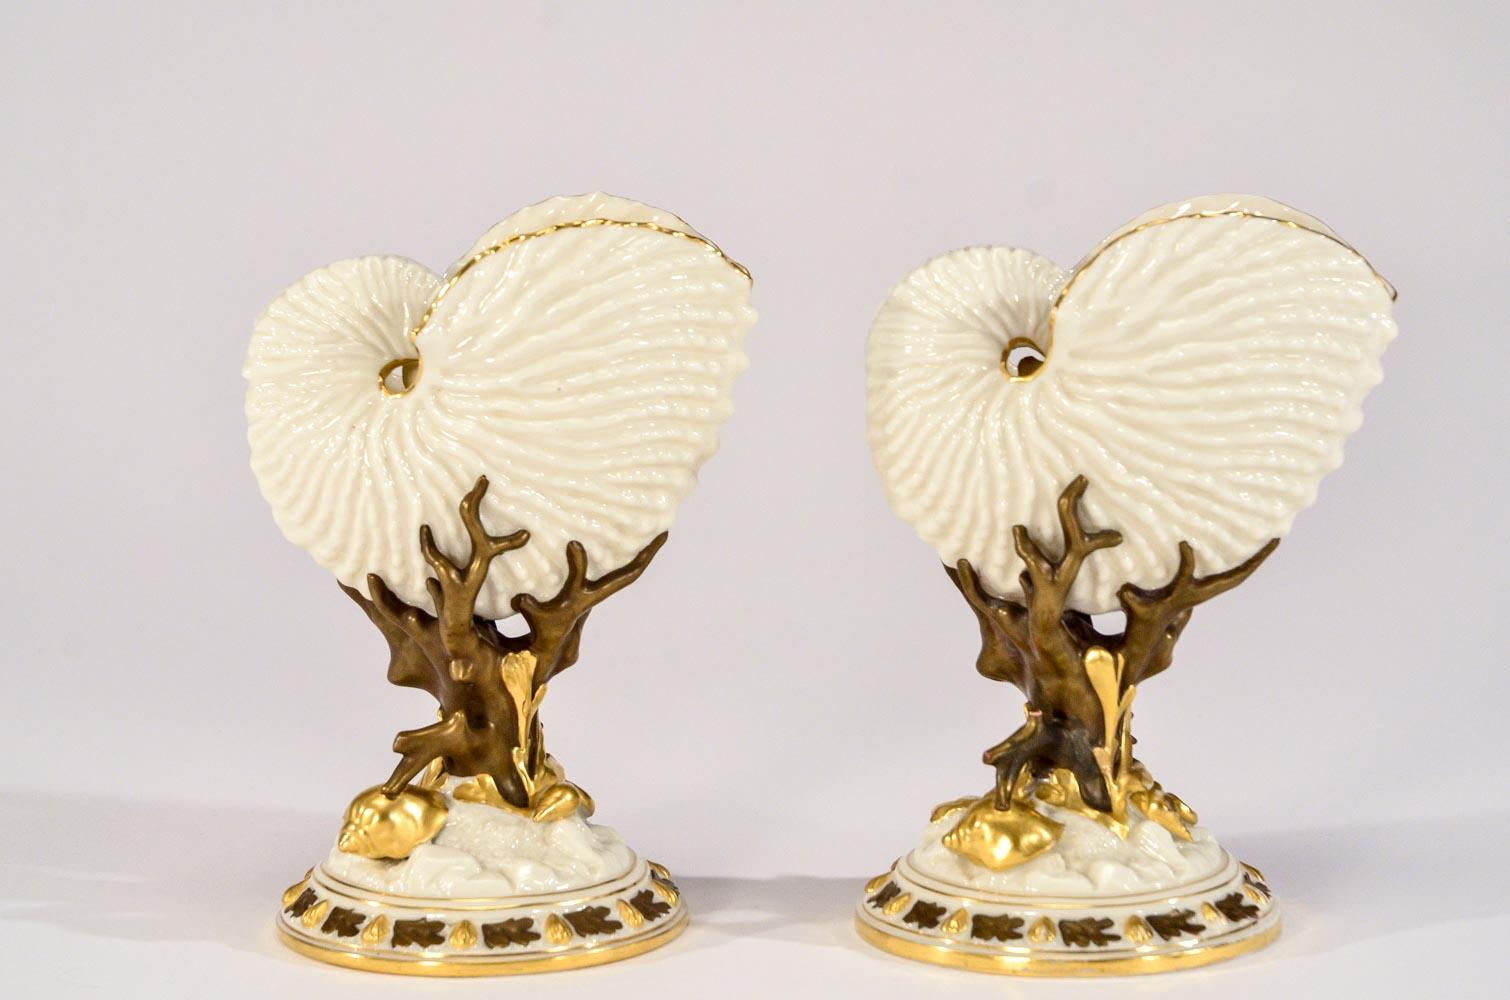 These rare examples of Aesthetic Movement ivory porcelain themed vases features a matching pair of realistically molded open shells nestled in coral branches. The translucent walls allow light that highlights the realistic shape and relief of the